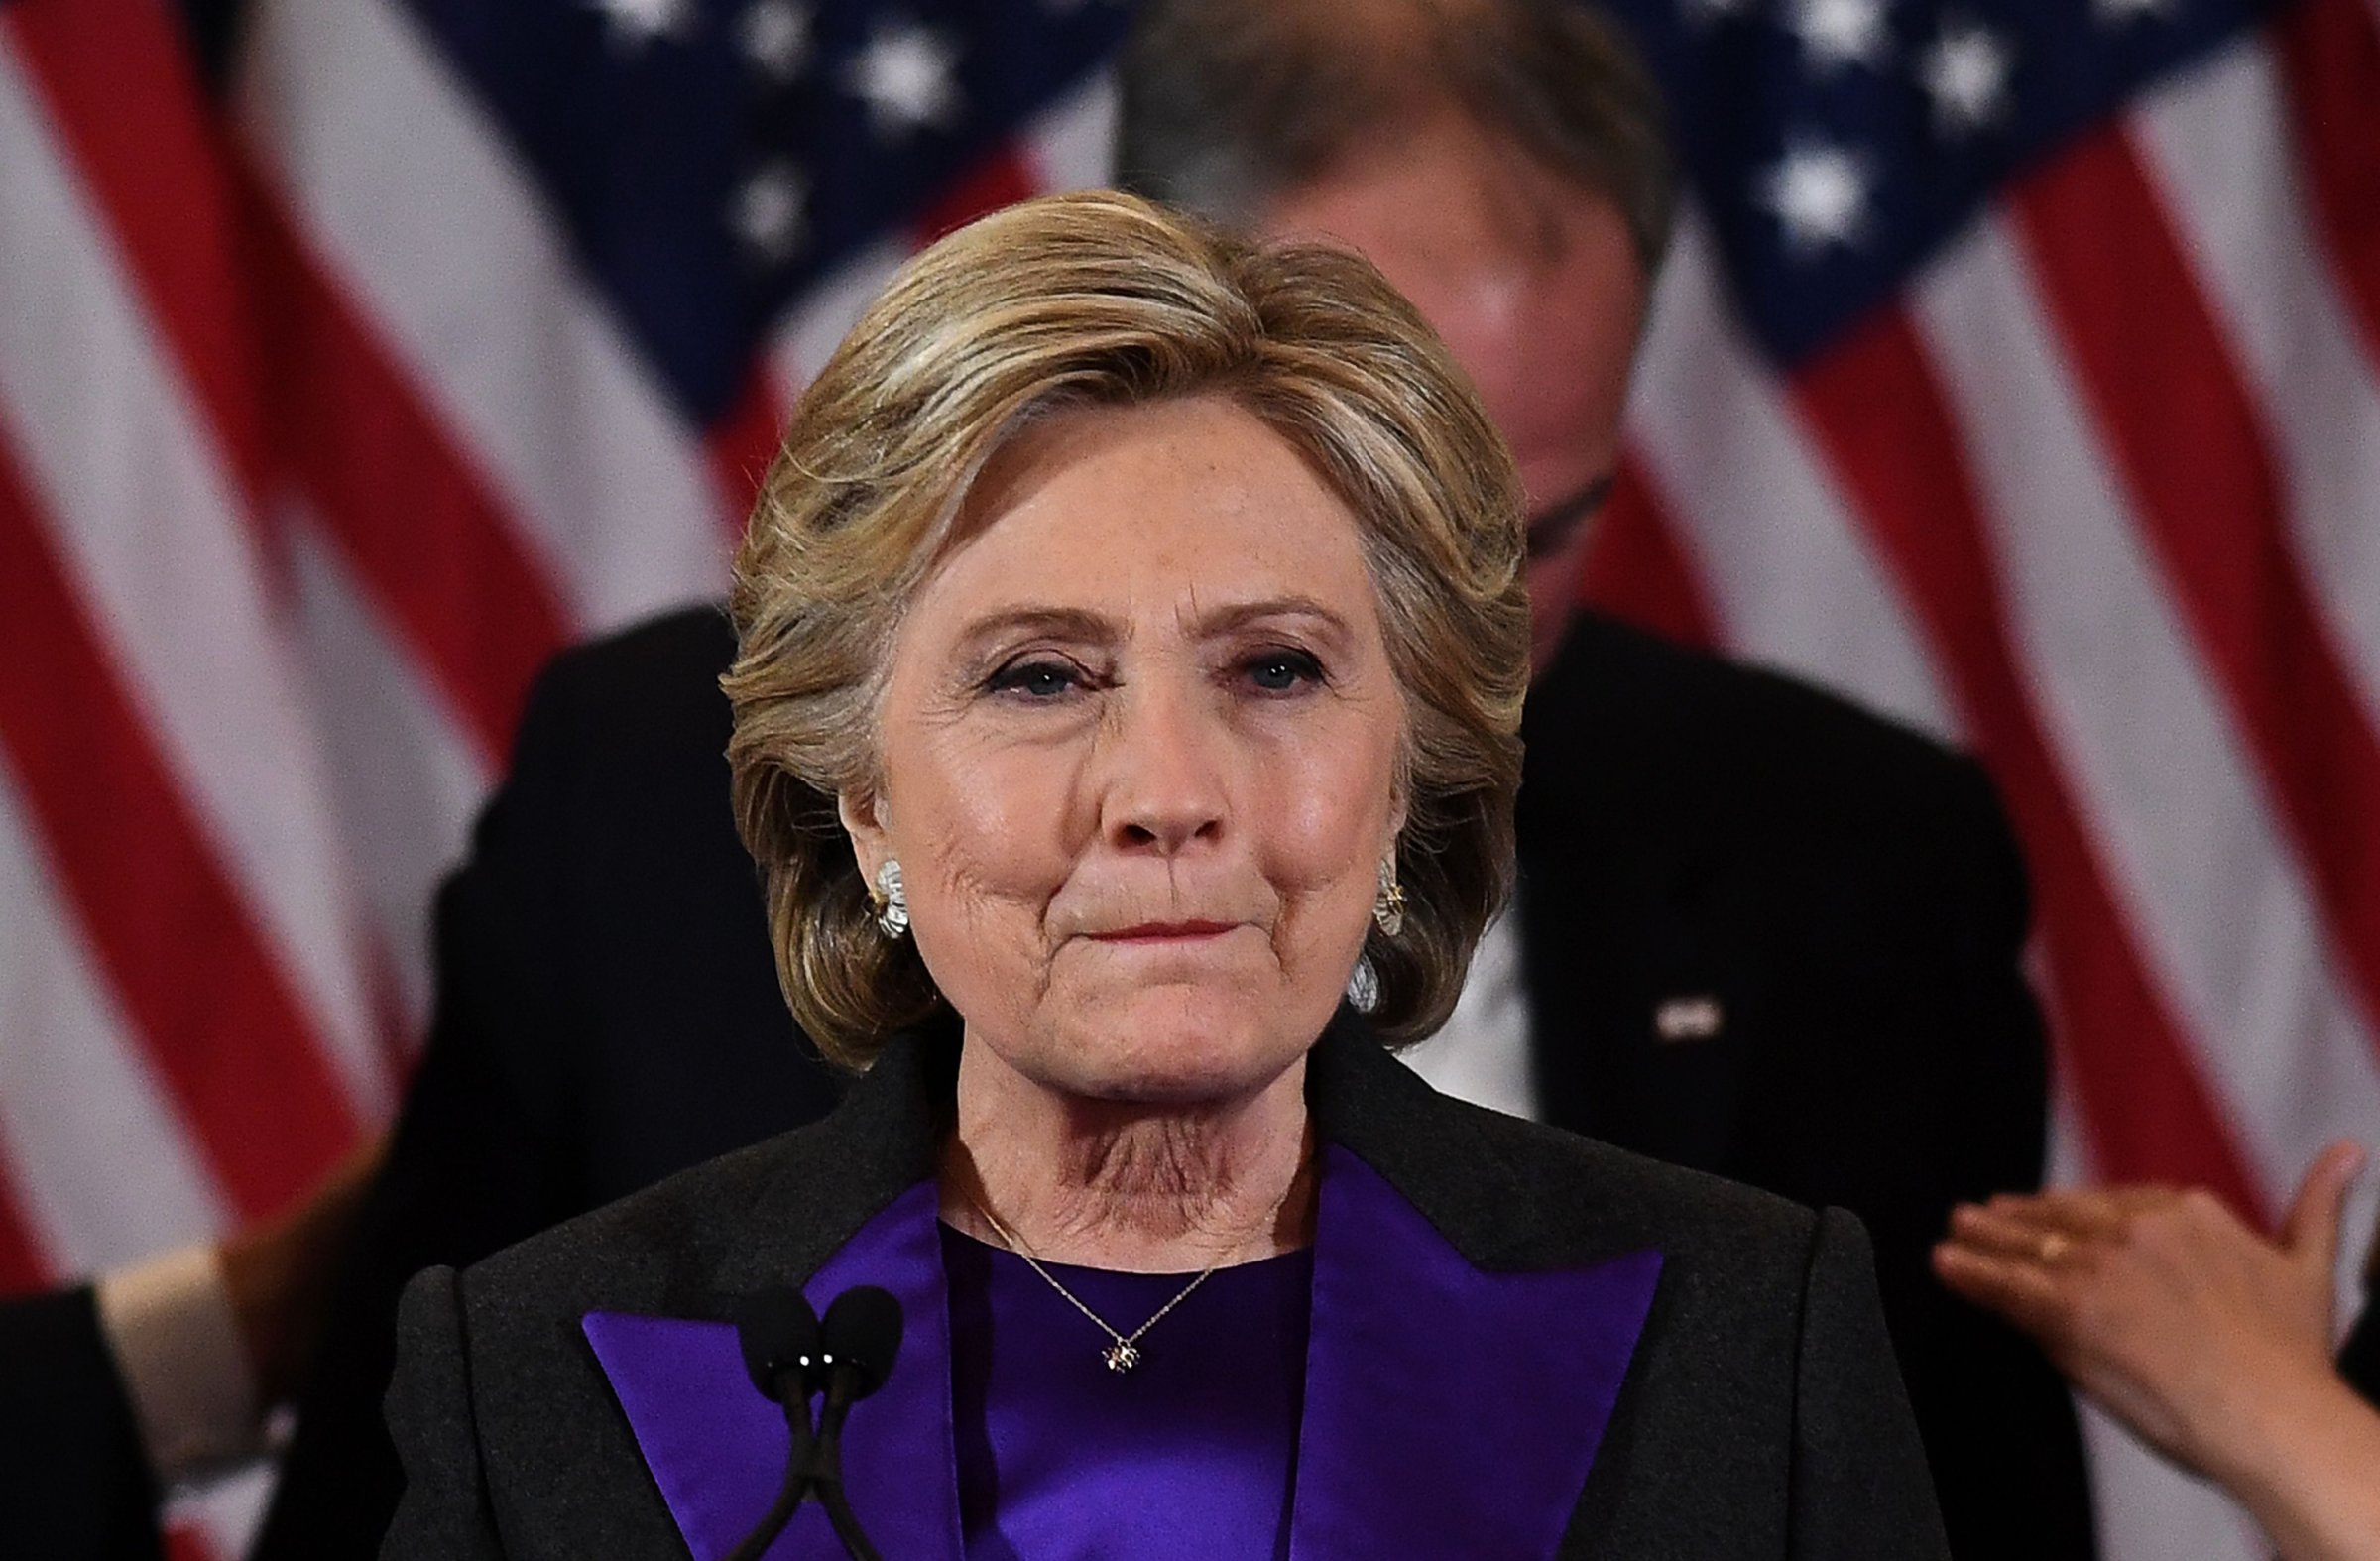 US Democratic presidential candidate Hillary Clinton makes a concession speech after being defeated by Republican president-elect Donald Trump in New York on November 9, 2016.